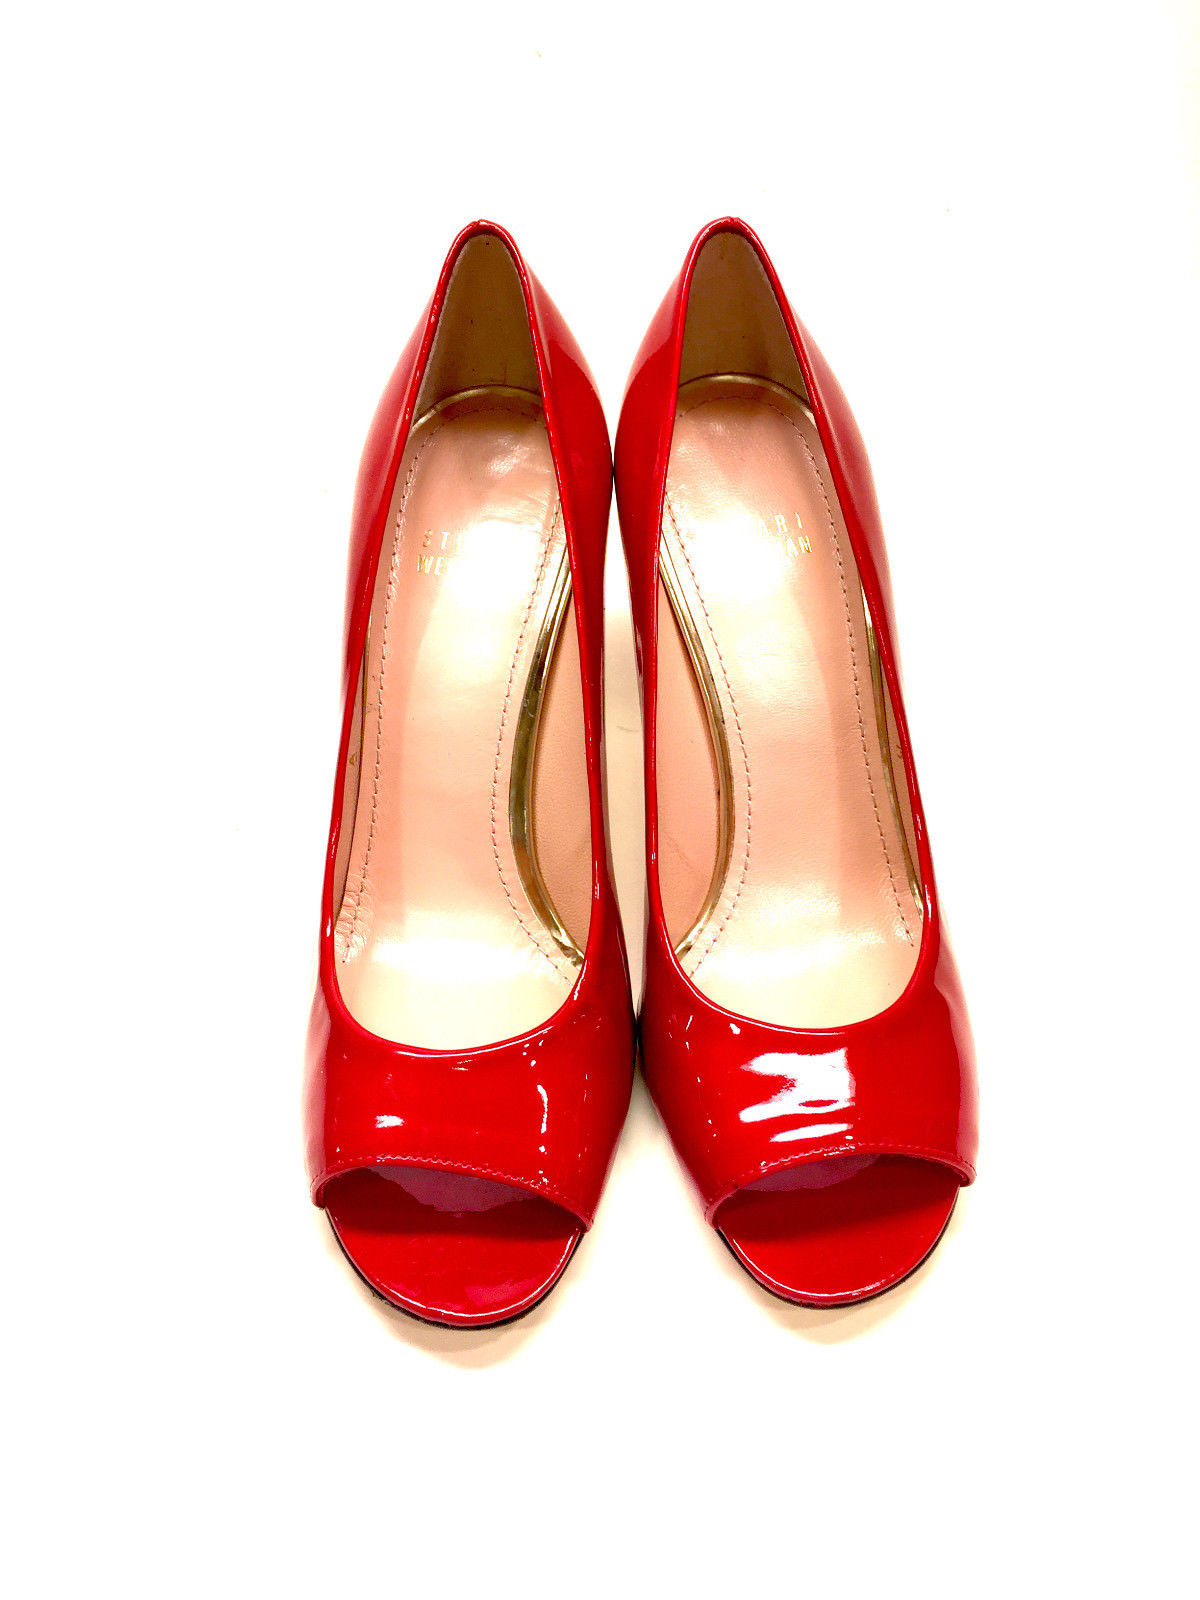 red shoes open toe